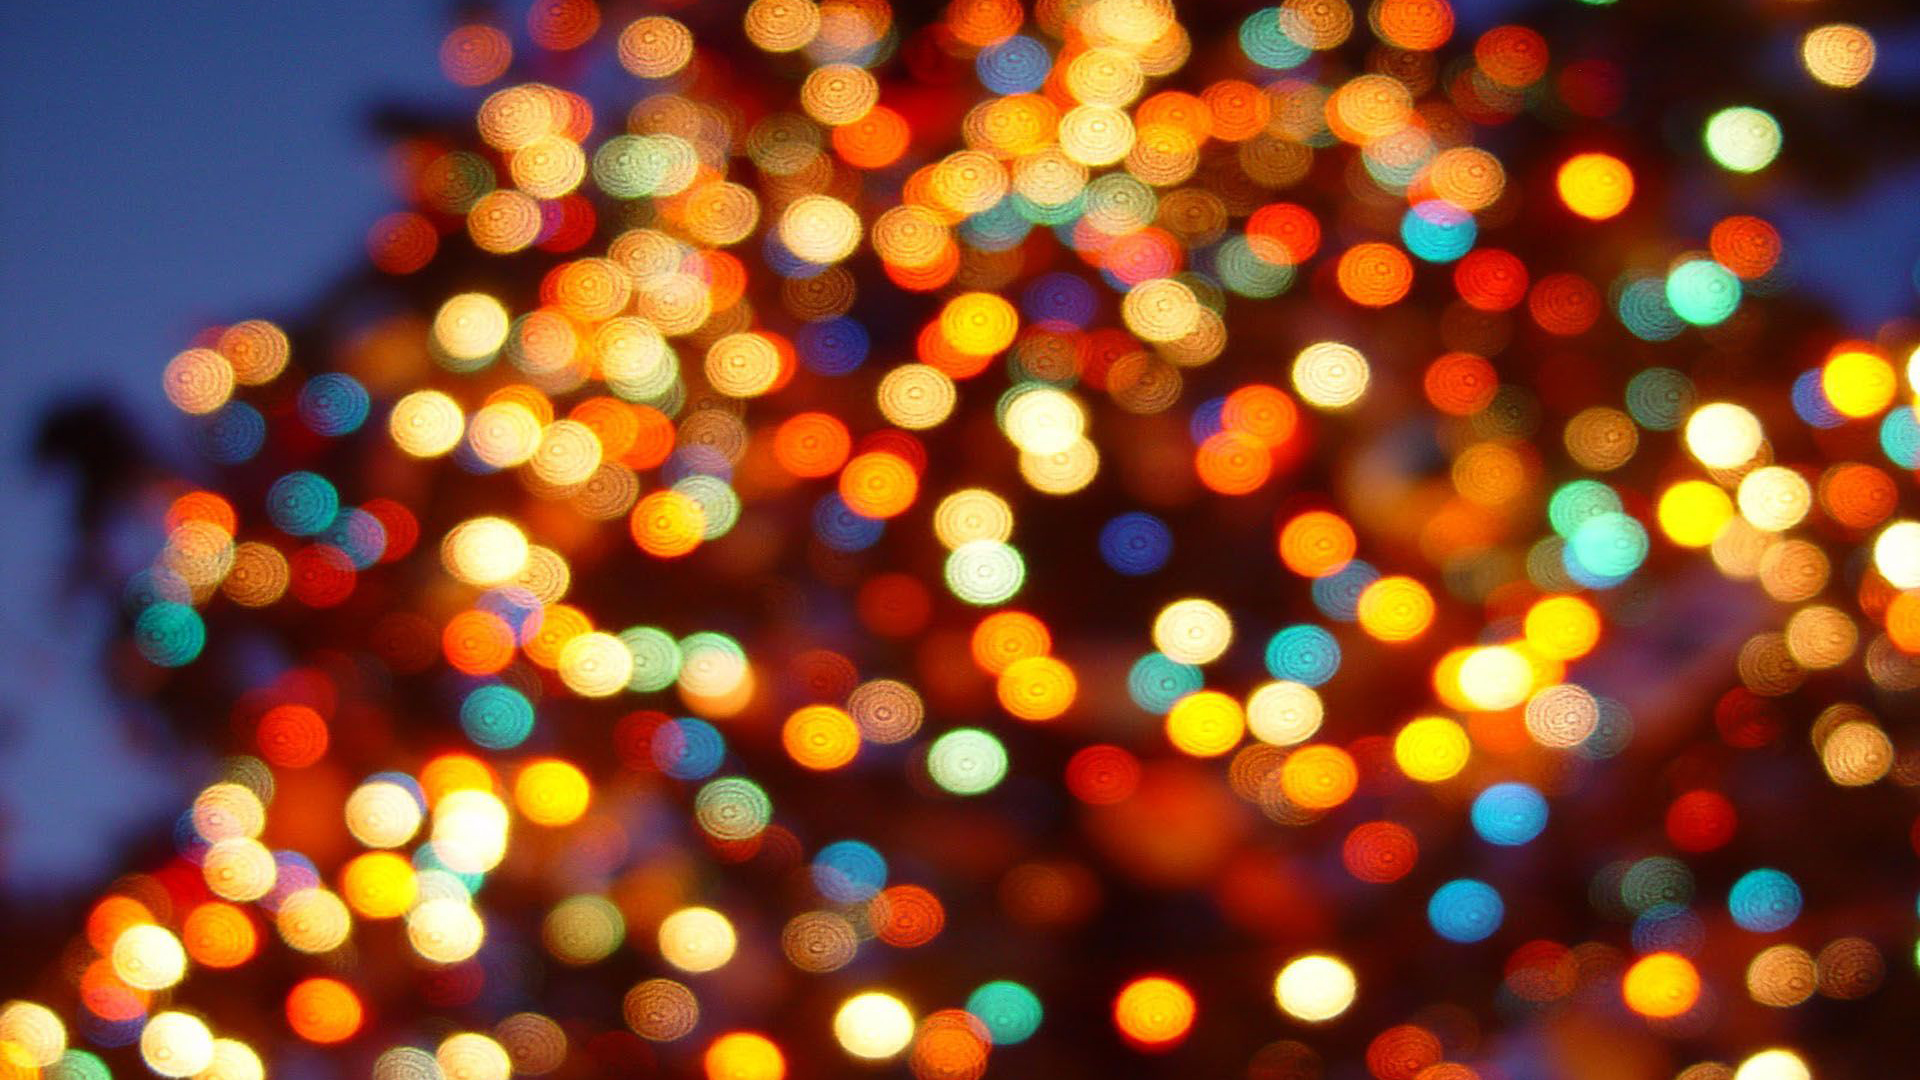 Aesthetic Christmas Lights Wallpapers HD for PC Free Download -  